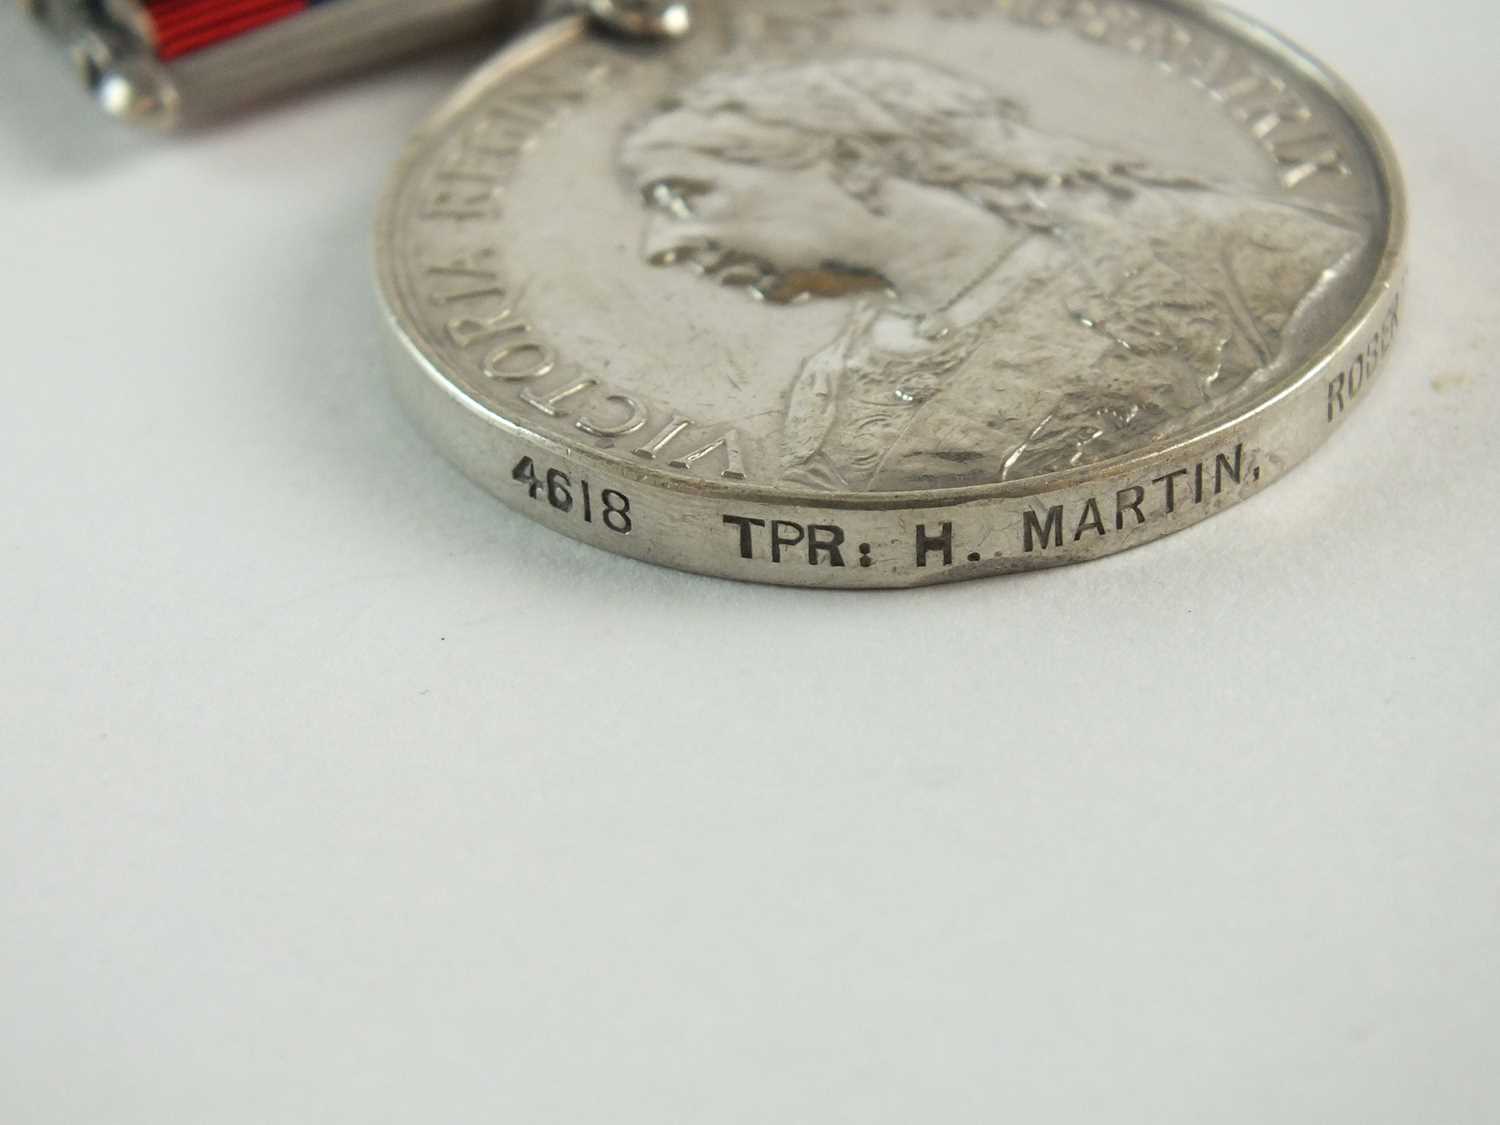 Pair of Boer War medals to Tpr H. Martin - Image 3 of 6